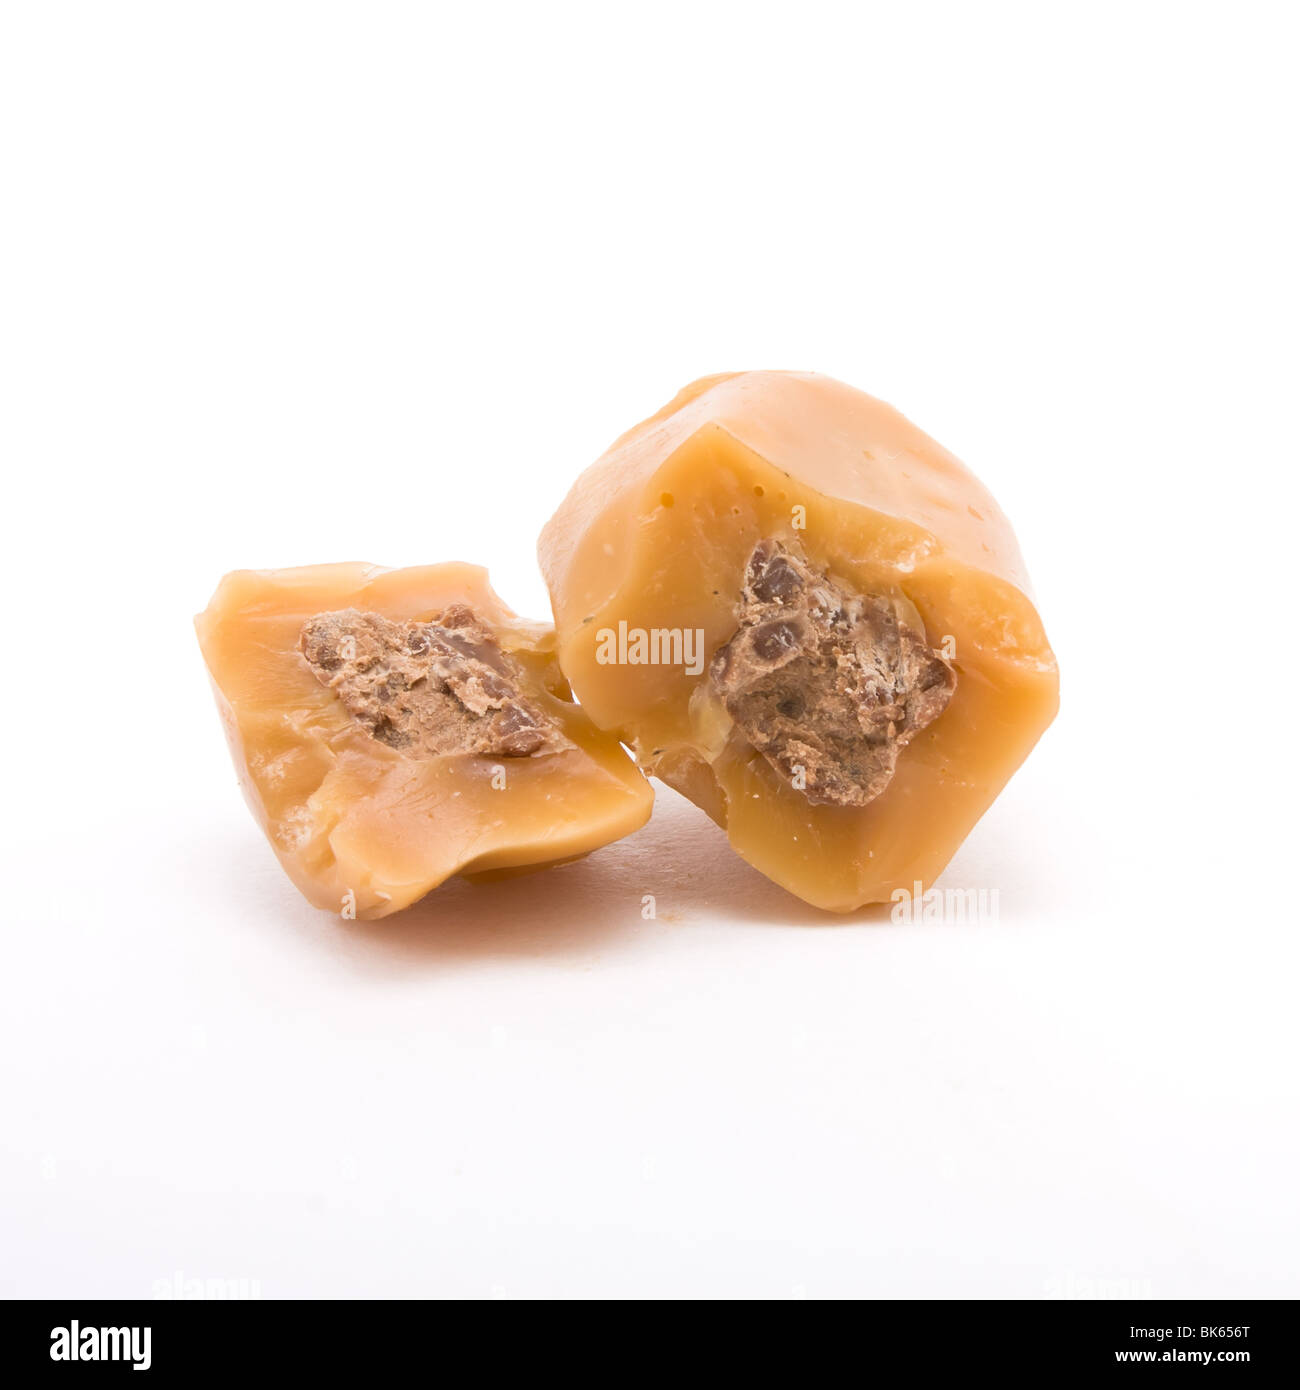 Chocolate filled Caramel toffee isolated against white background. Stock Photo